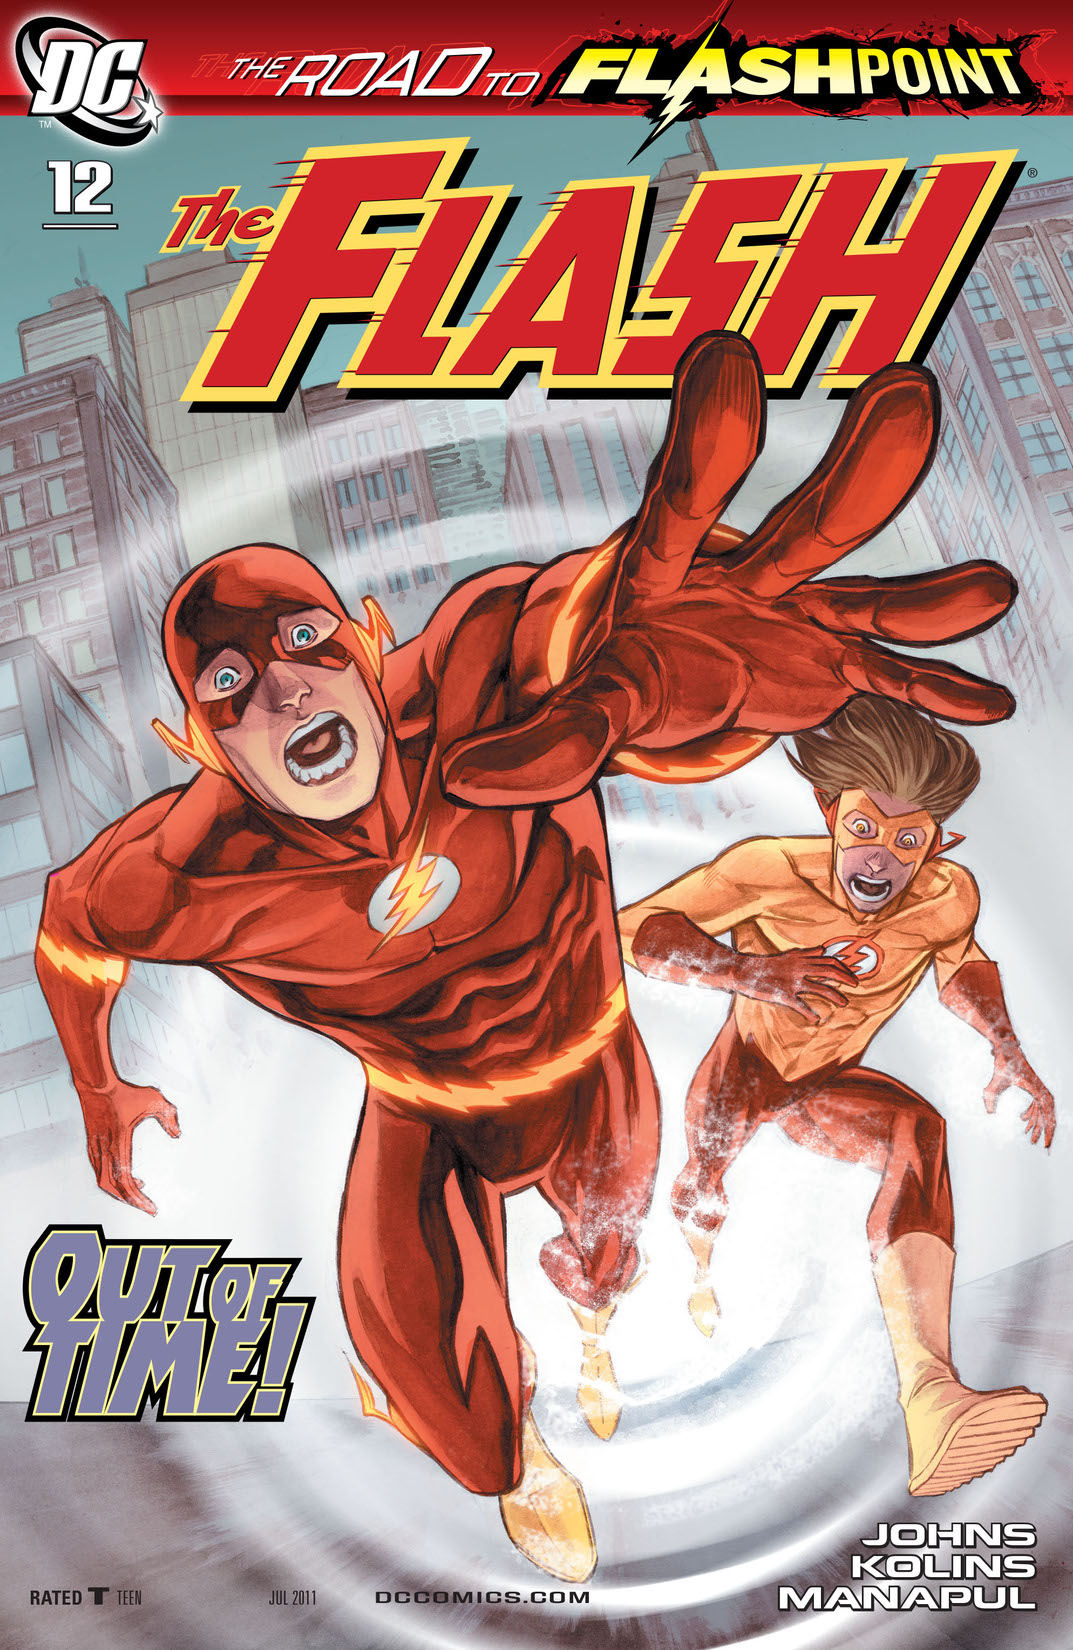 Flash (2010-) #12 preview images